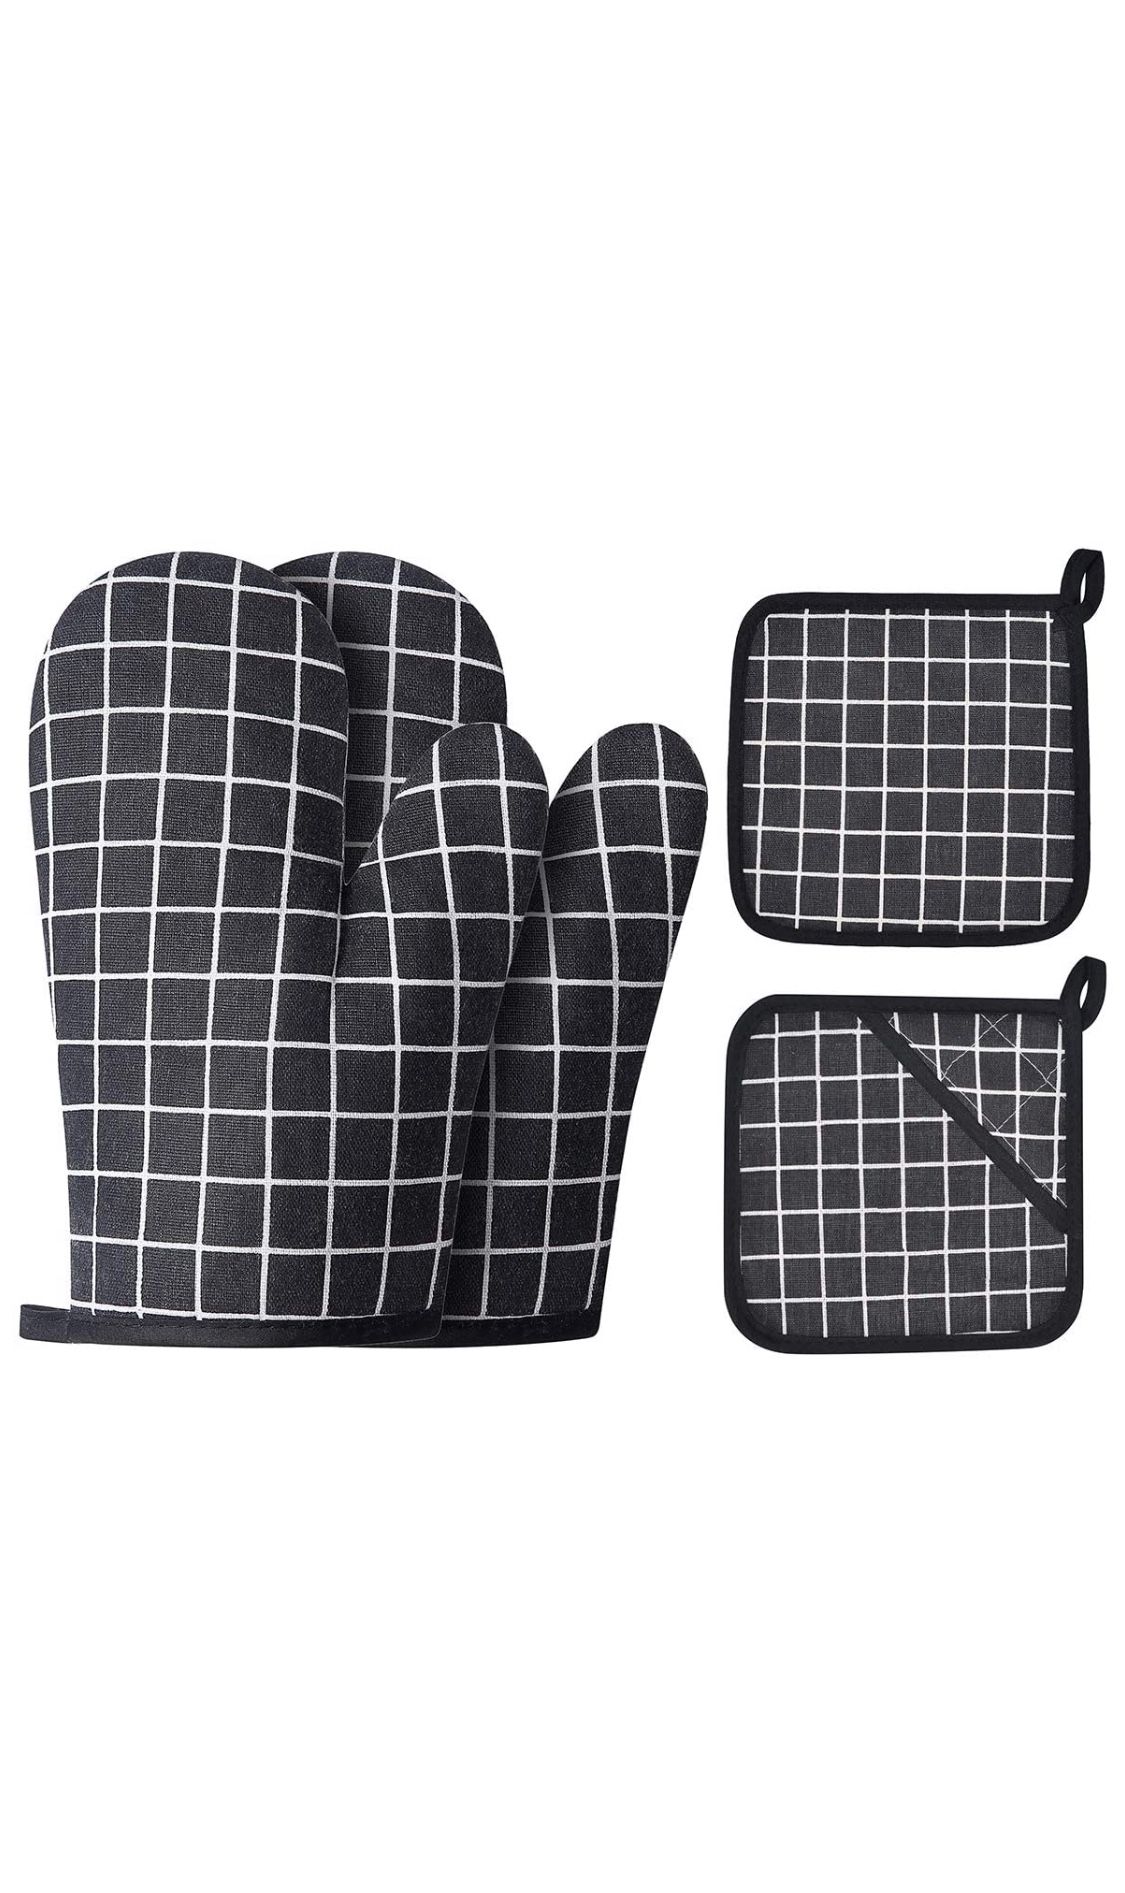 Win Change Oven Mitts and Potholders BBQ Gloves-Oven Mitts and Pot Holders with Recycled Cotton Infill Silicone Non-Slip Cooking Gloves for Cooking B